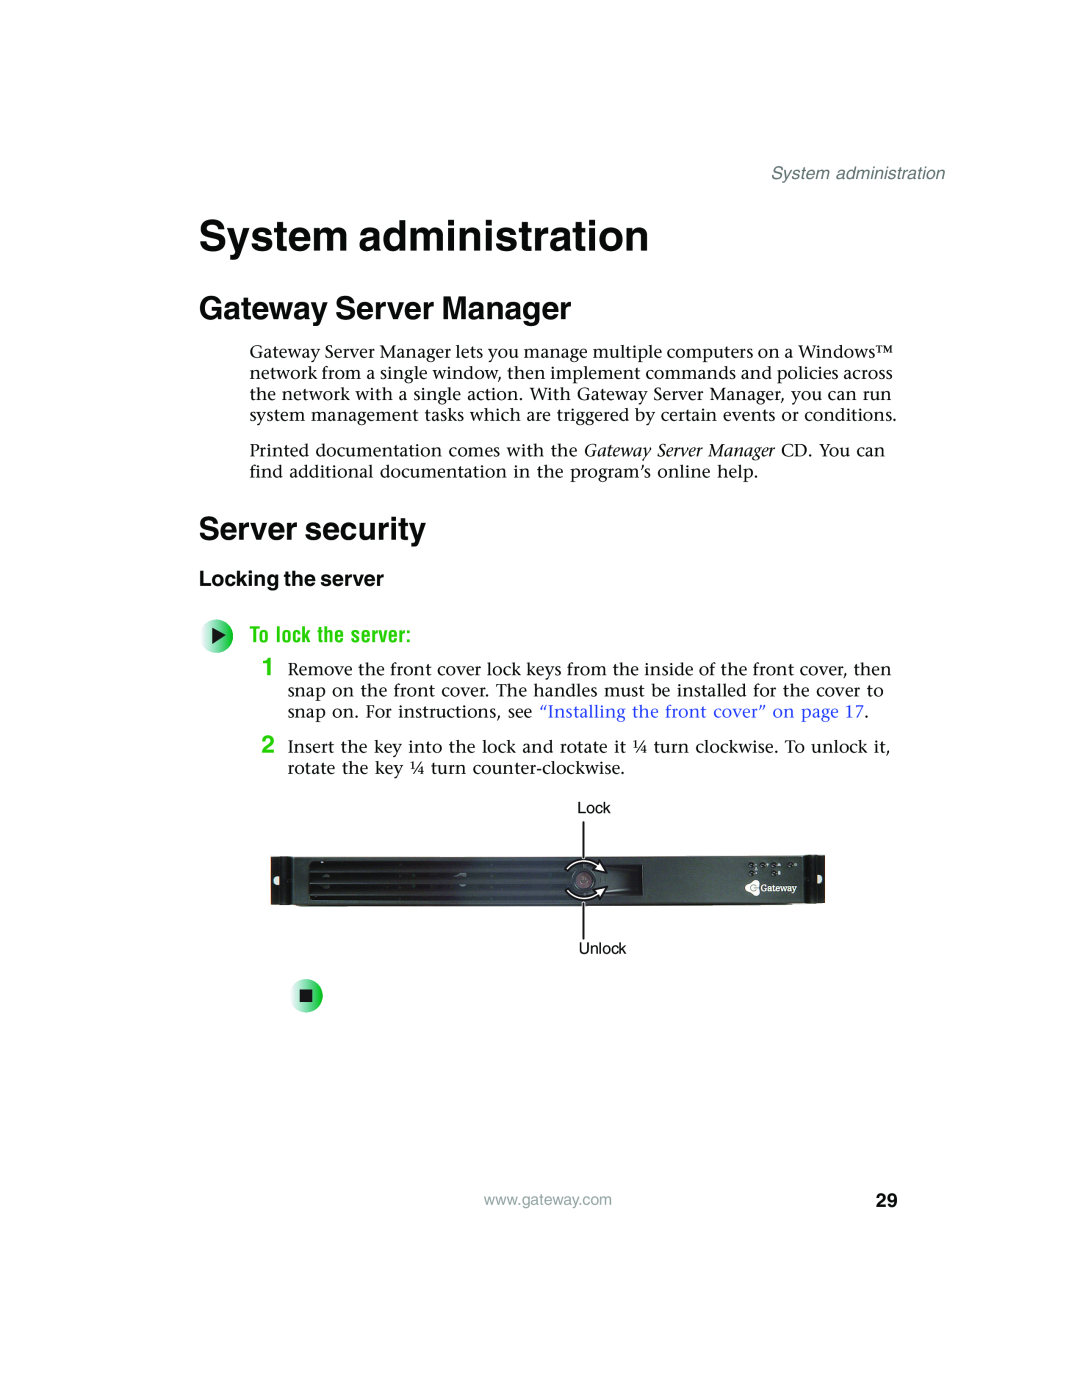 Gateway 955 manual System administration, Gateway Server Manager, Server security, Locking the server, To lock the server 